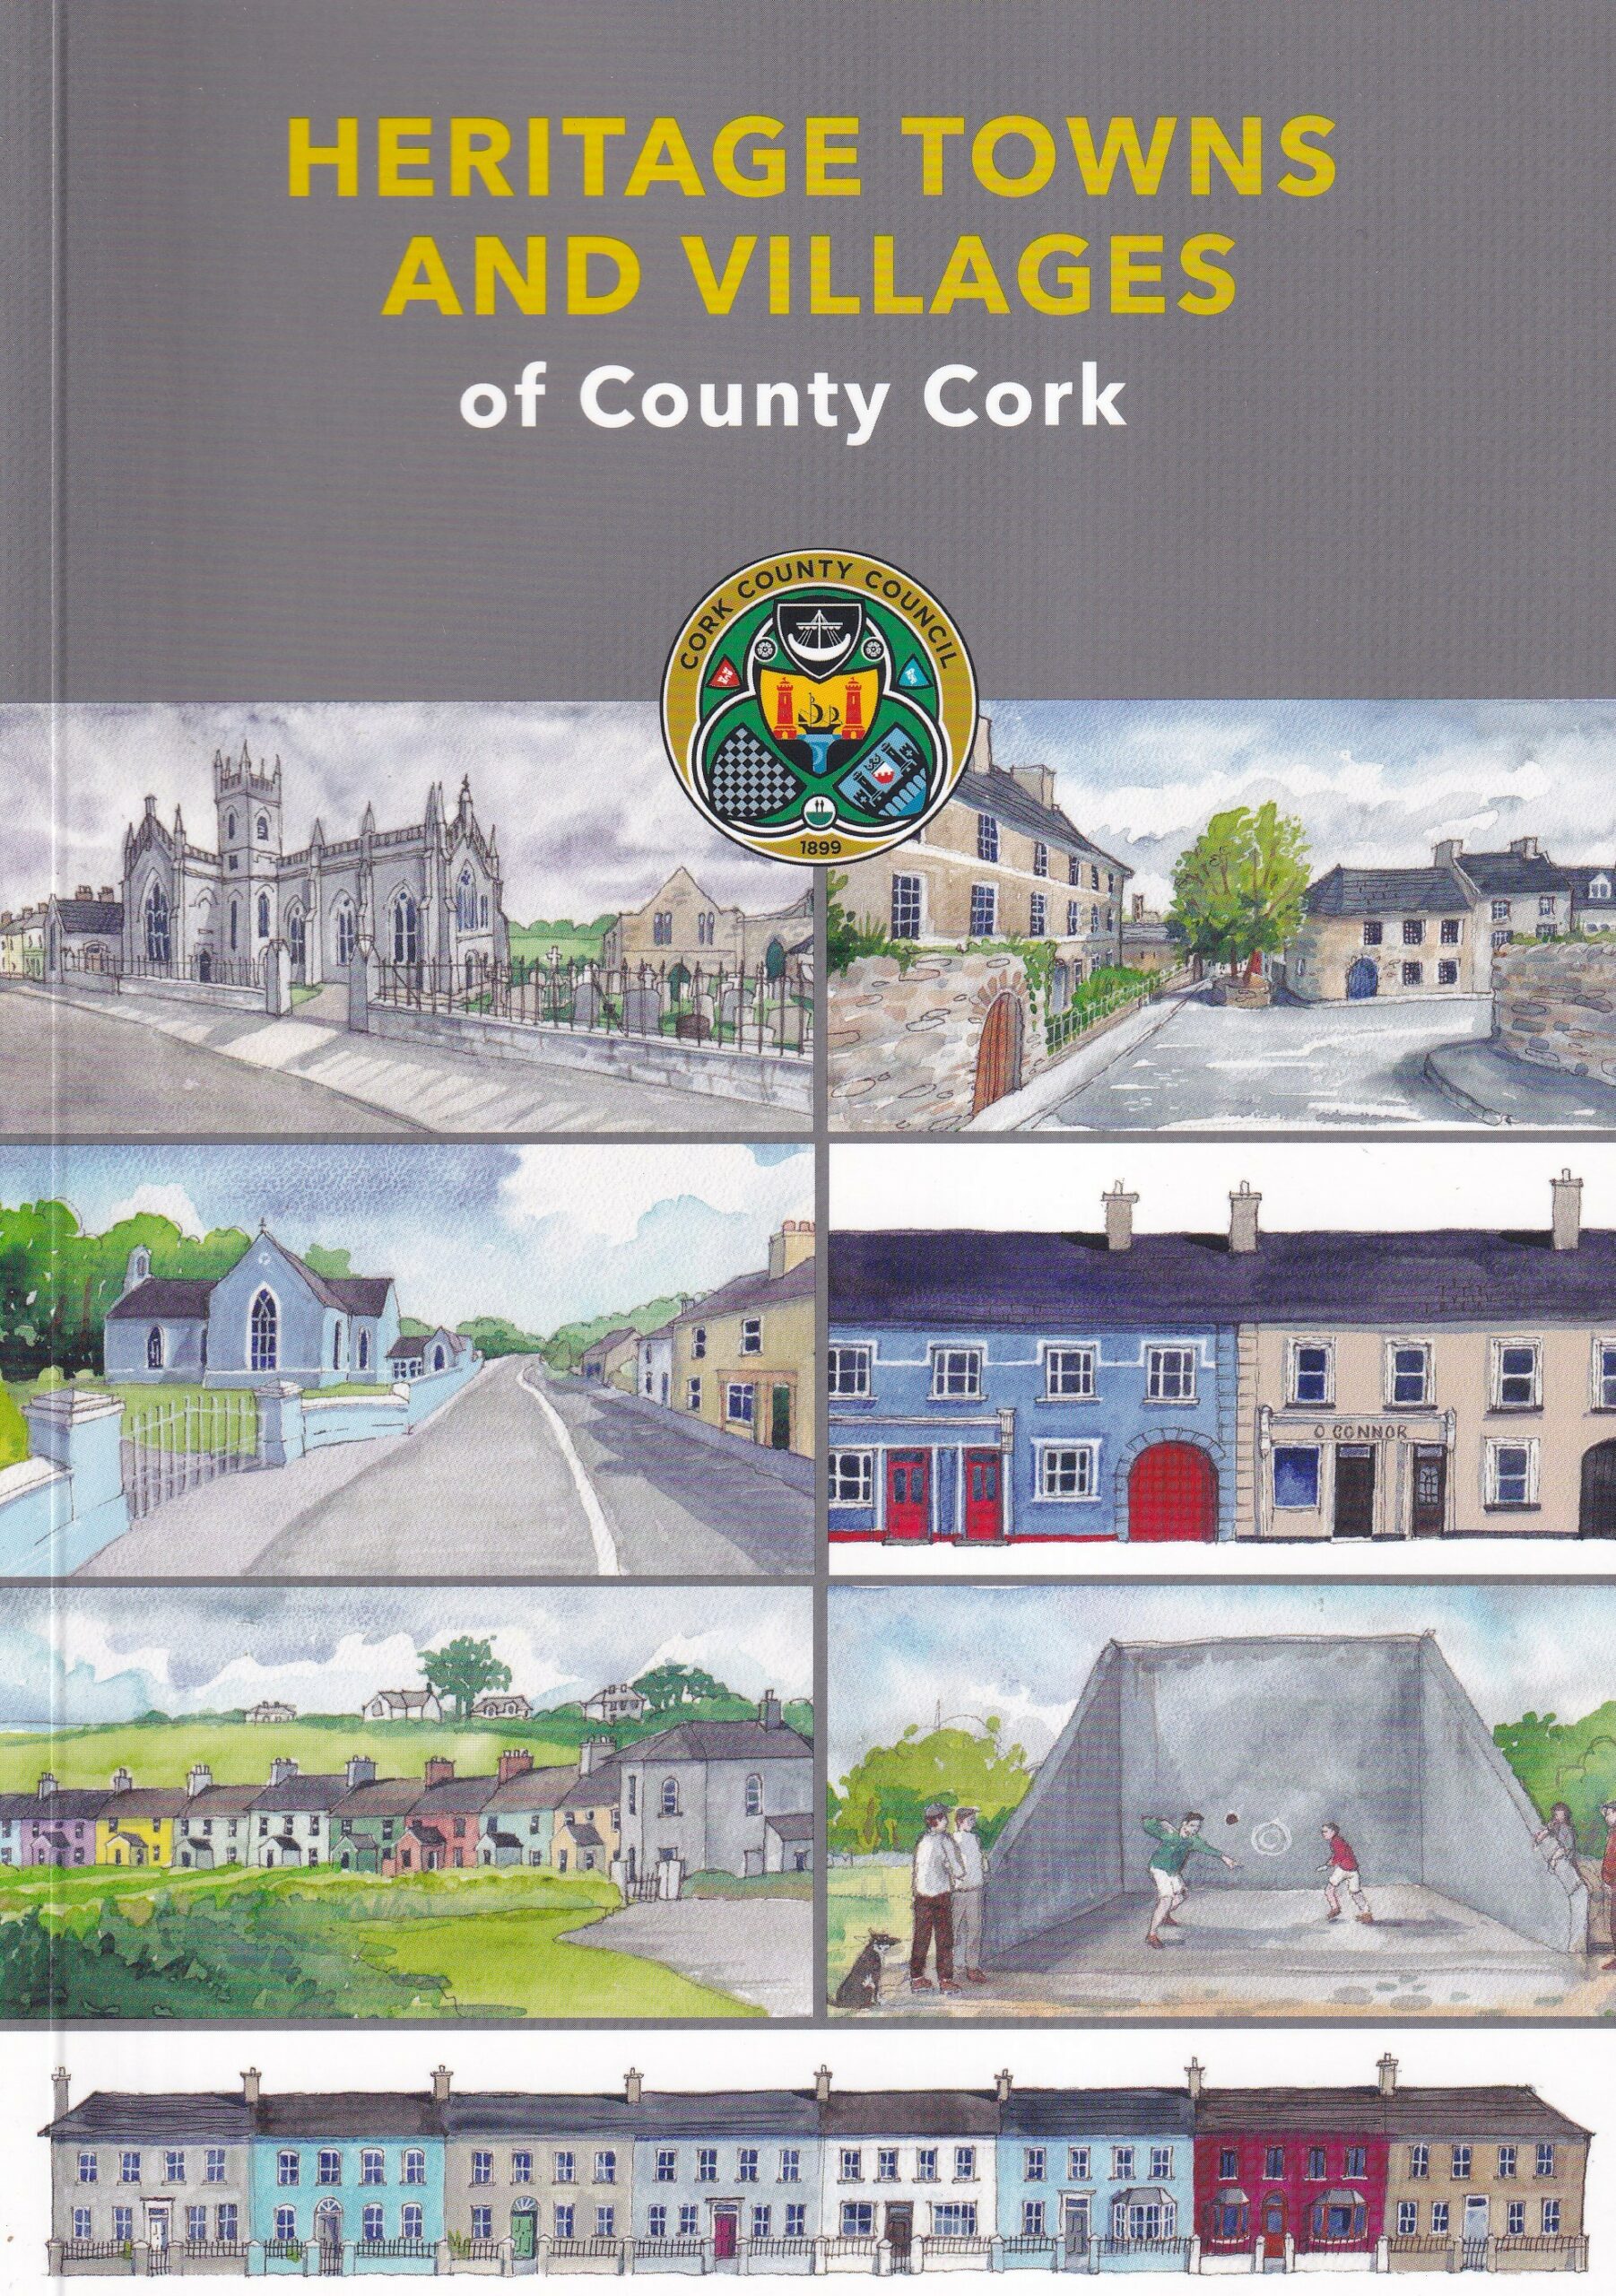 Heritage Towns and Villages of County Cork by Cork County Council